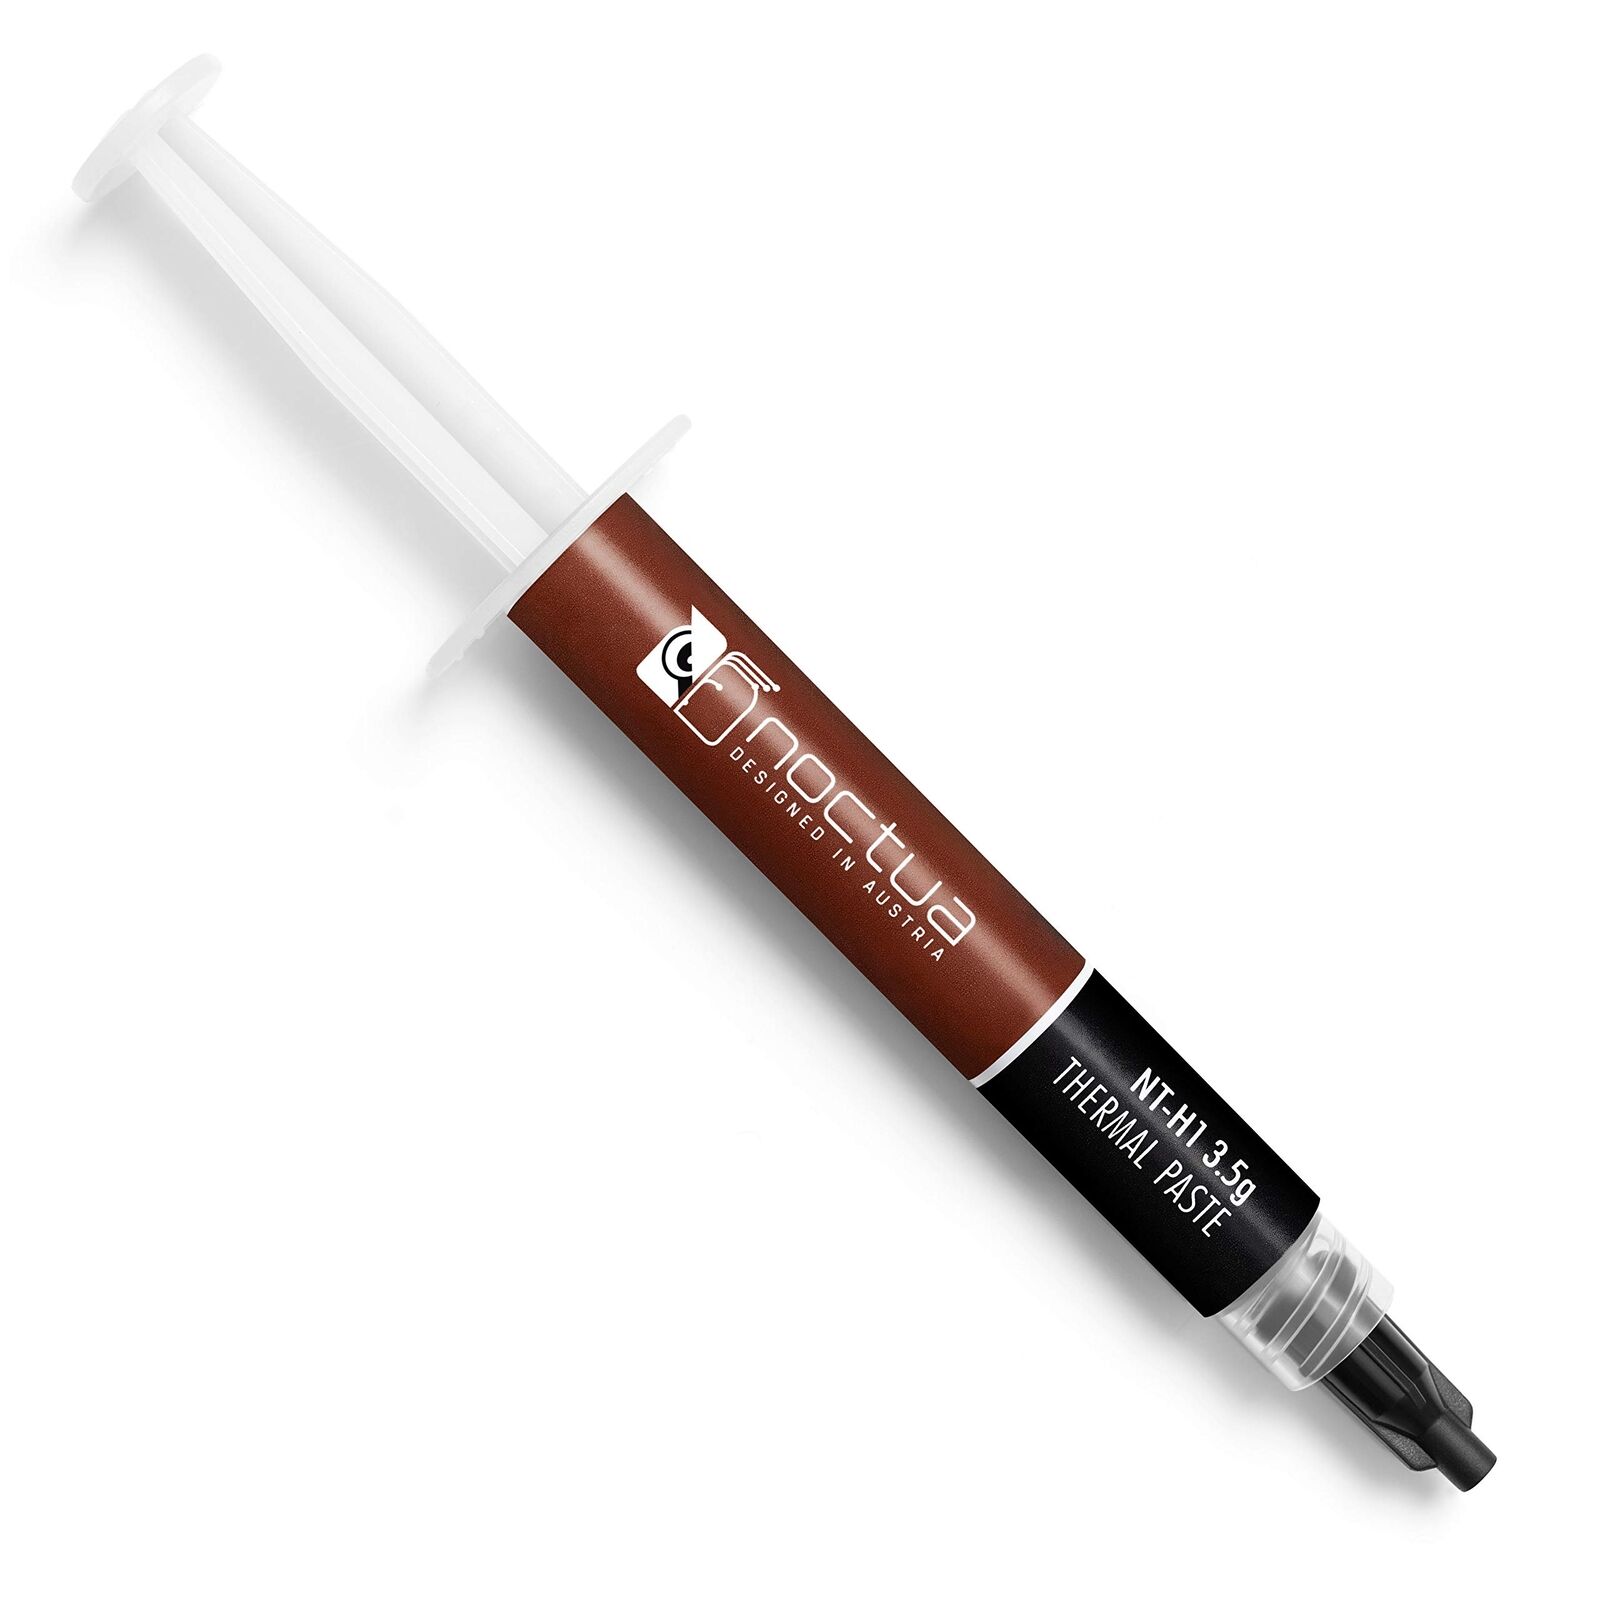 NT-H1 3.5g Pro-Grade Thermal Compound Paste 3.5g